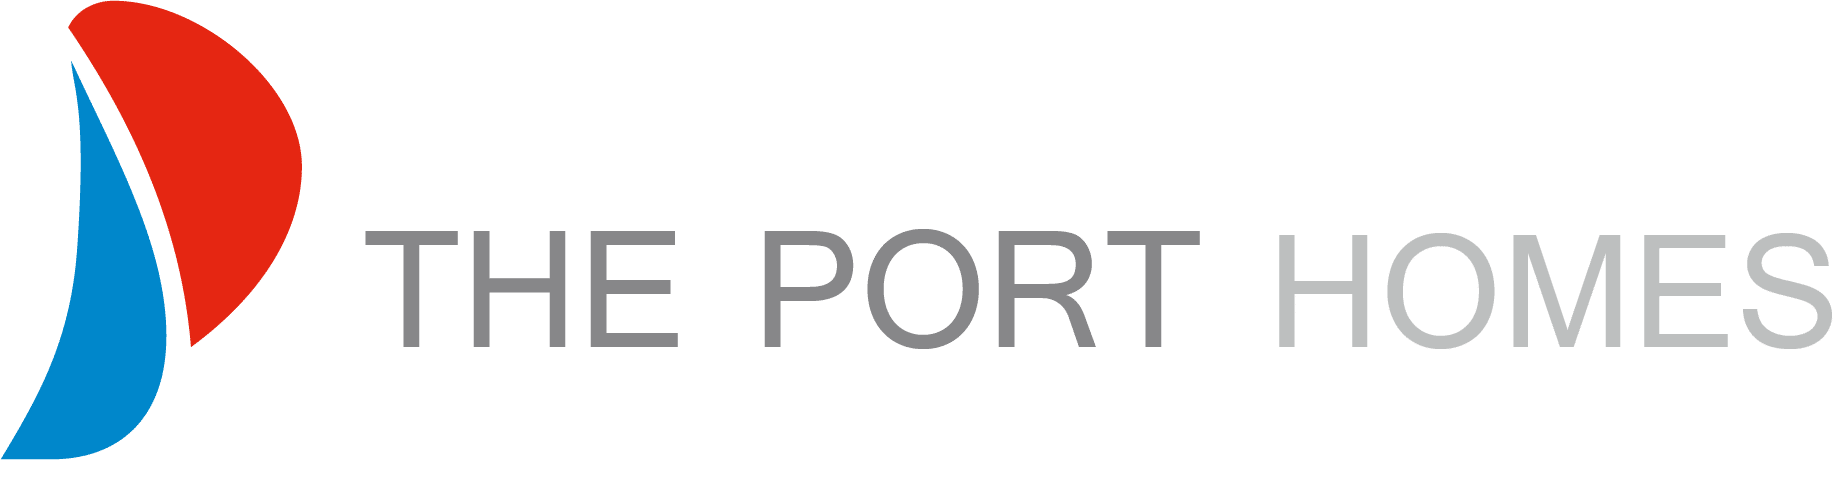 The Port Homes